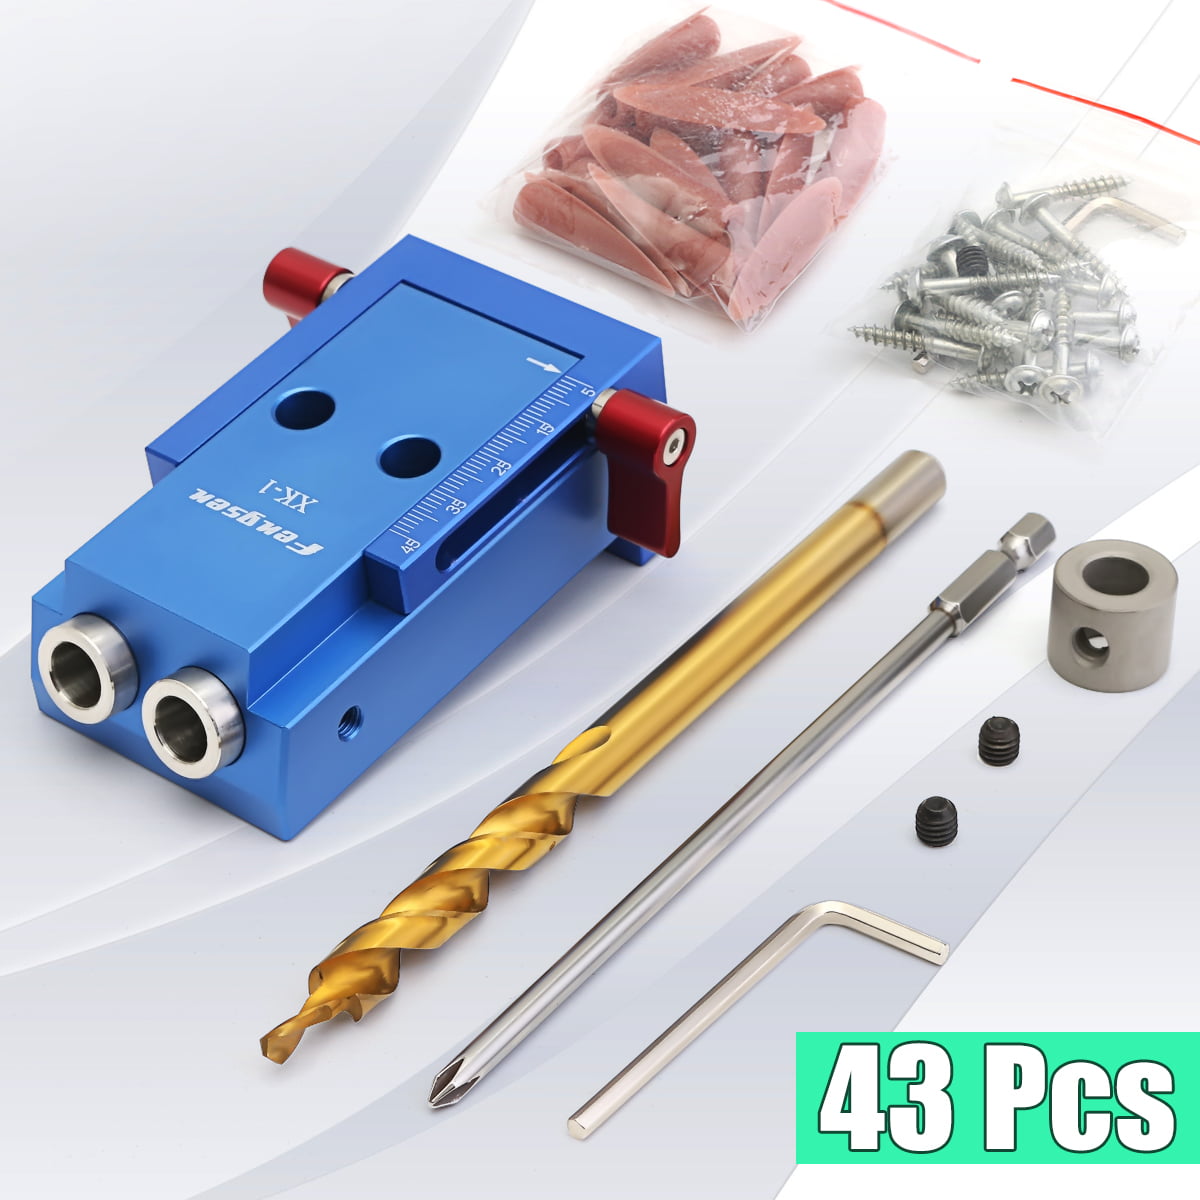 43Pcs Pocket Hole Jig Kit With Drill Bit Woodworking Carpentry Joinery  Blue 